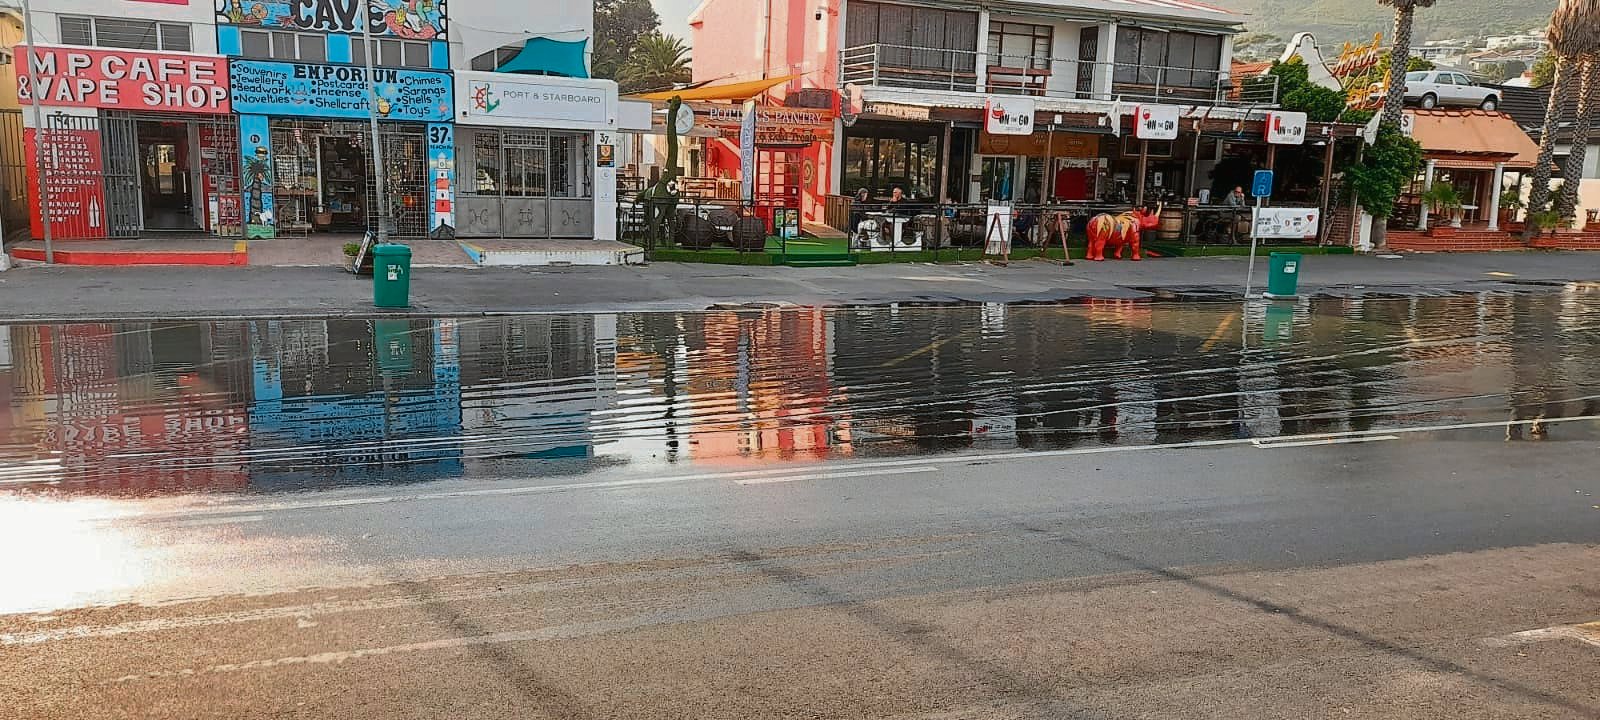 Access to several businesses along Beach Road in Gordon’s Bay was restricted due to a waterlogged street following a pipe burst.